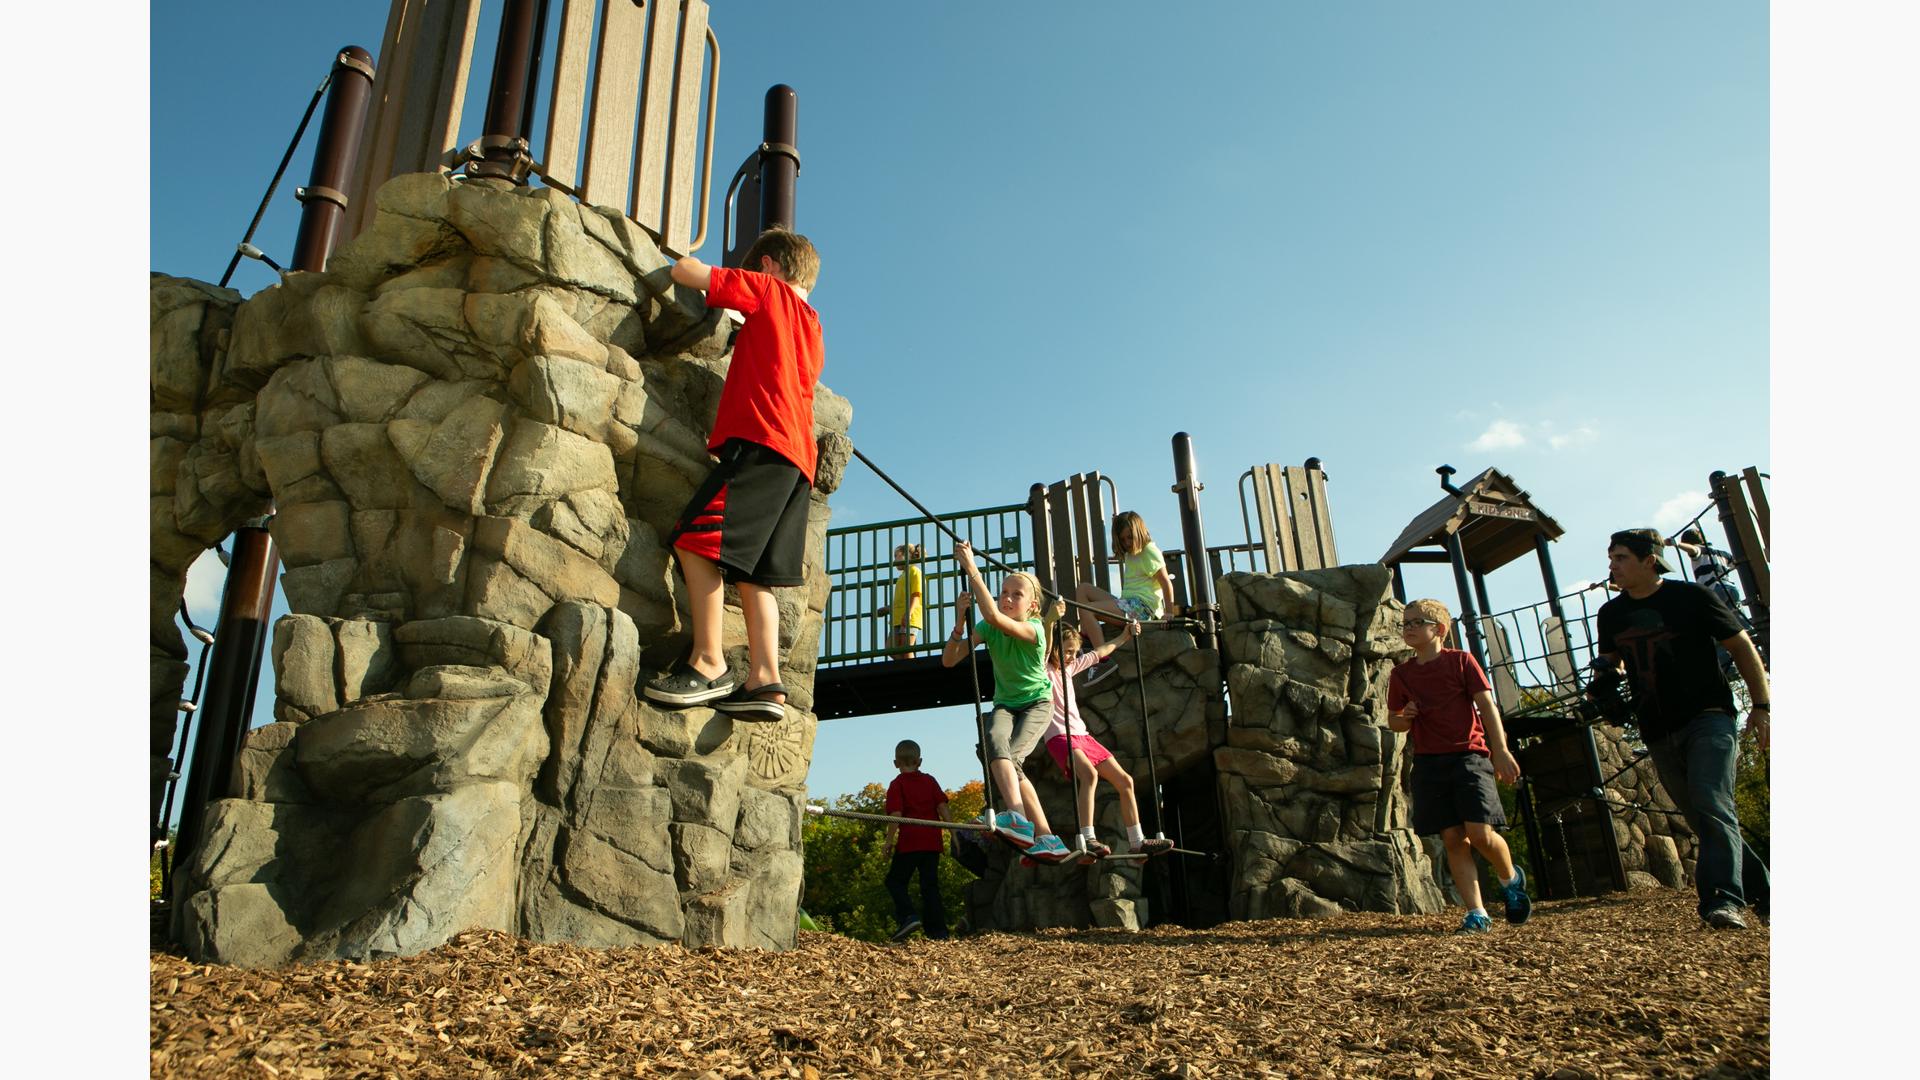 LSI - Why We Make the Best Playgrounds in the World - LANDSCAPE STRUCTURES  - PDF Catalogs, Documentation